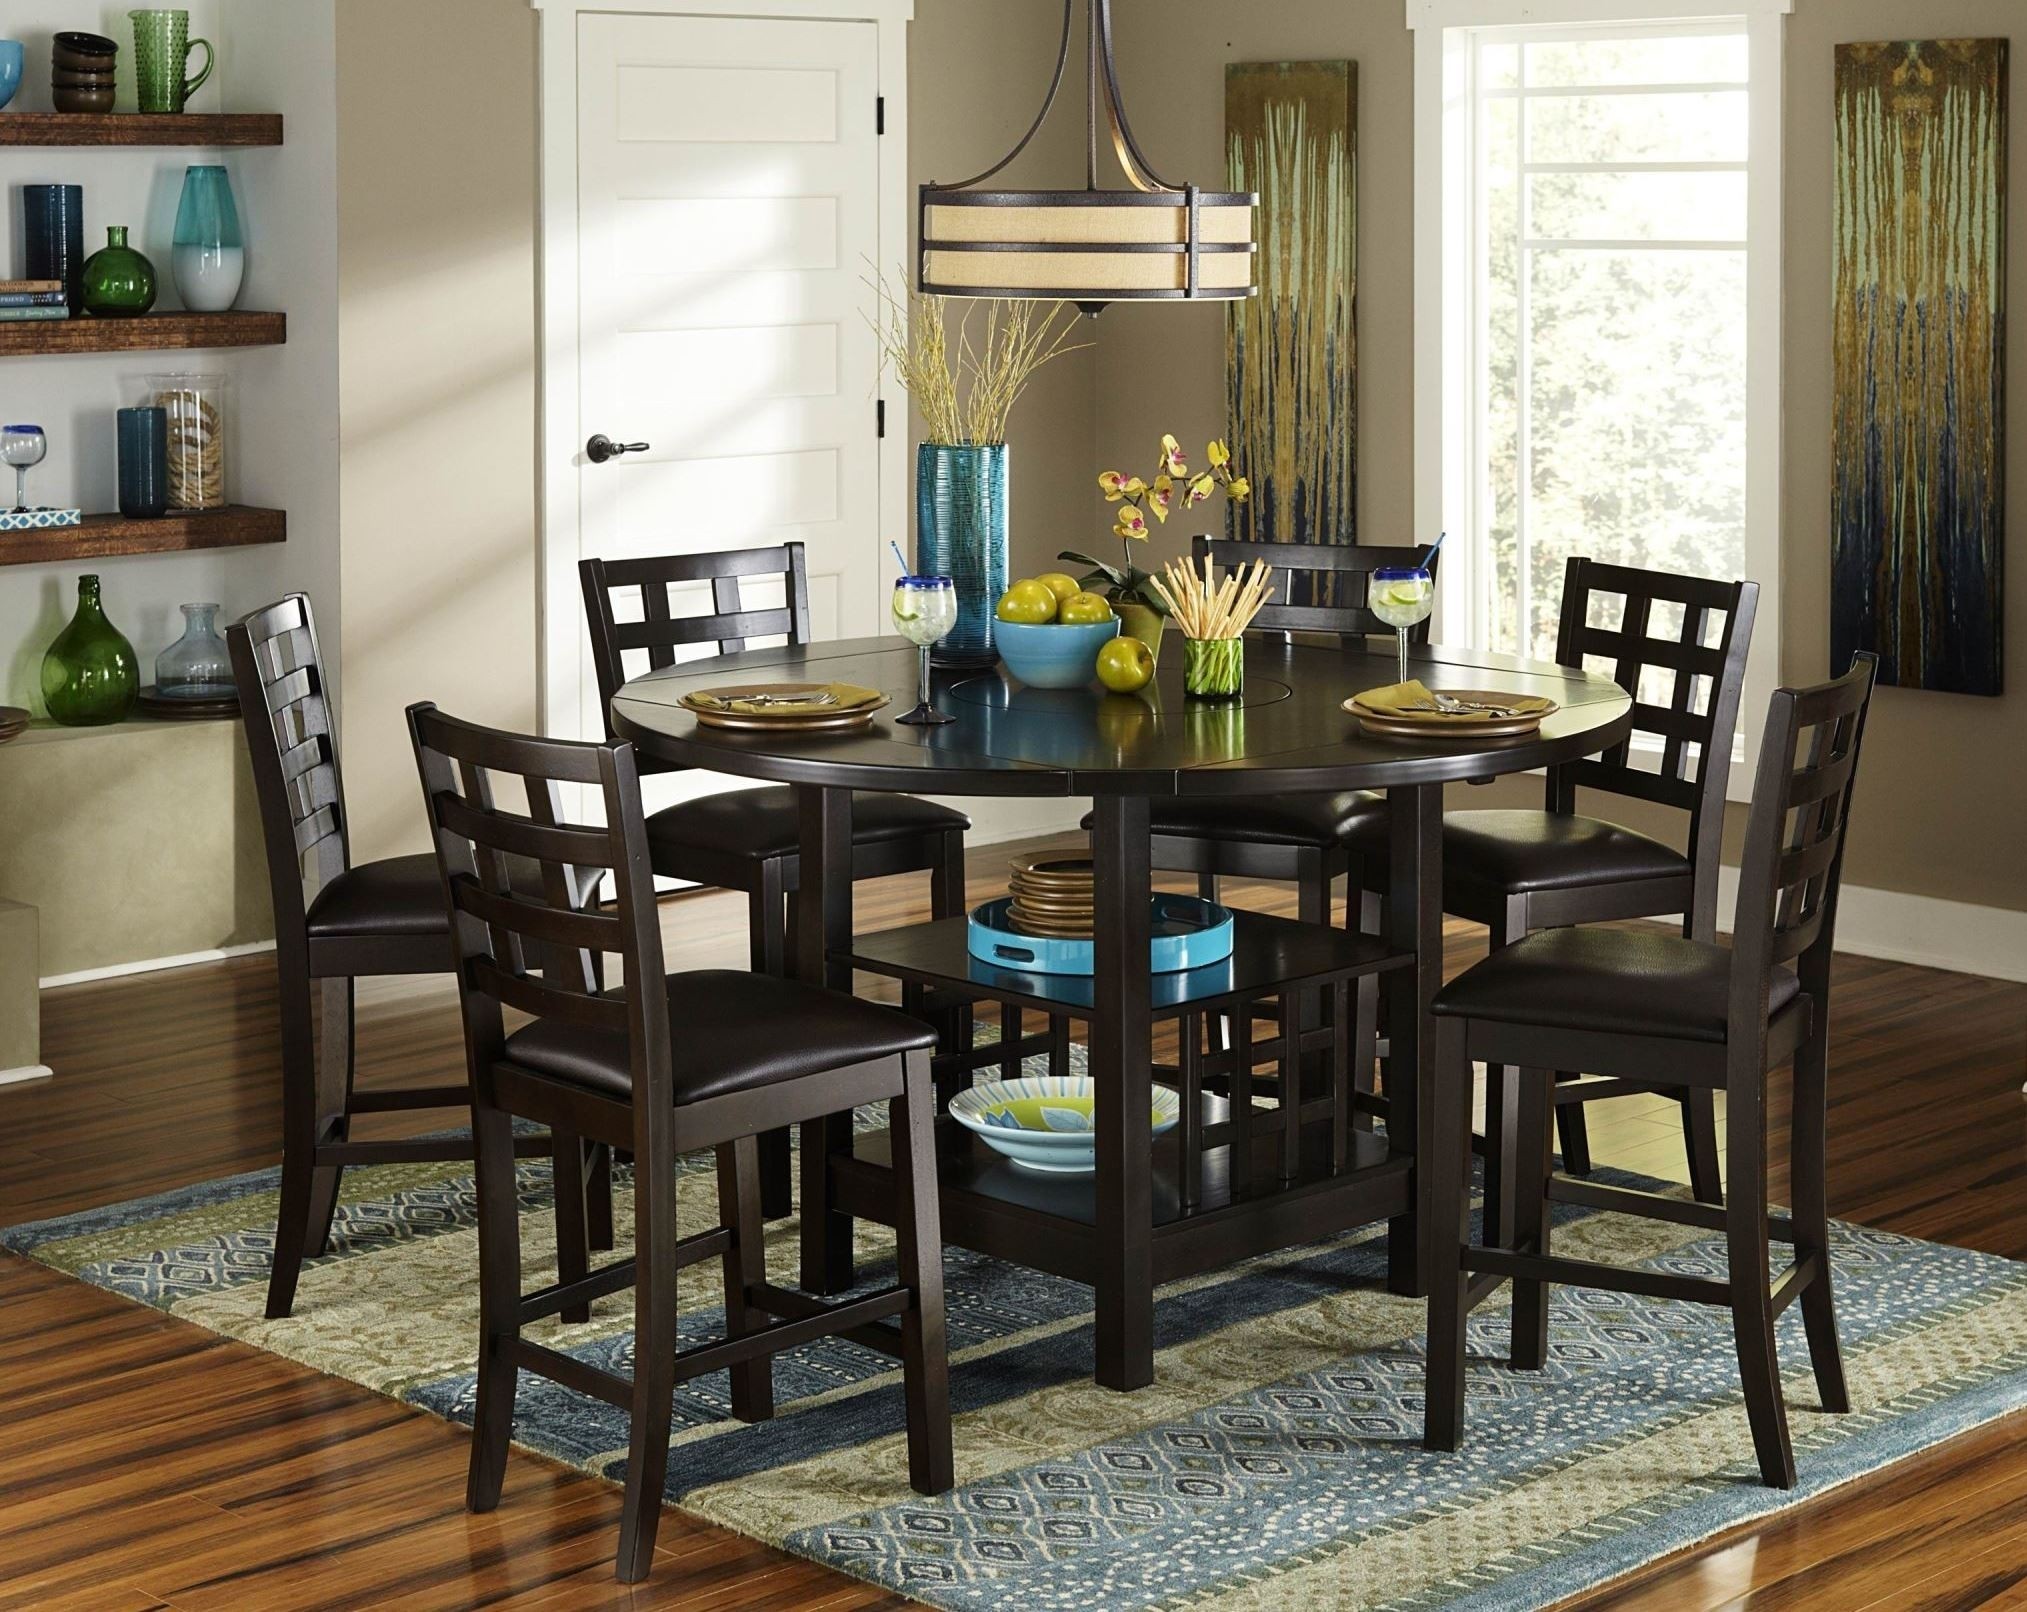 Glendine lazy susan counter height dining room set from